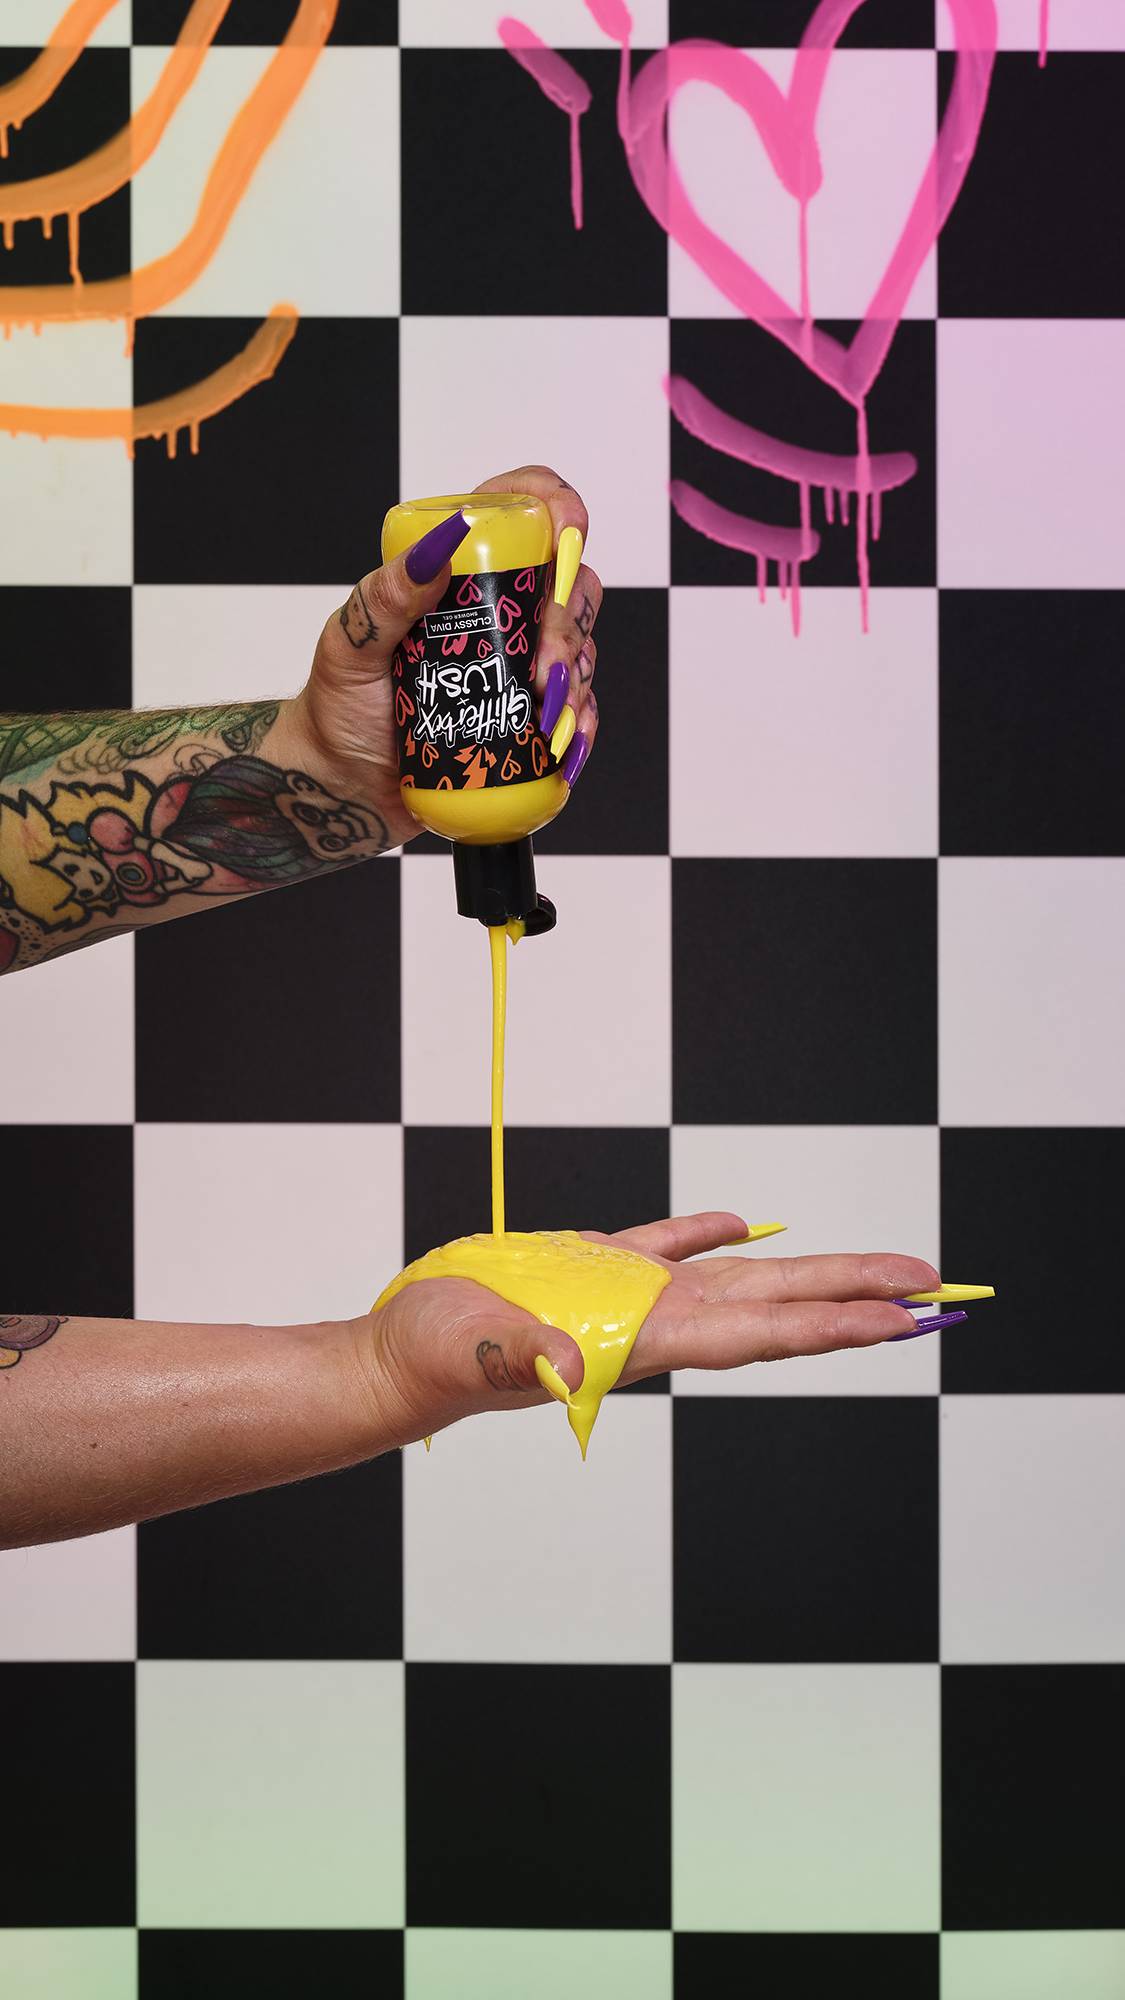 Image shows the model squeezing the bottle of bright yellow shower gel onto their hand in front of a checkered background.